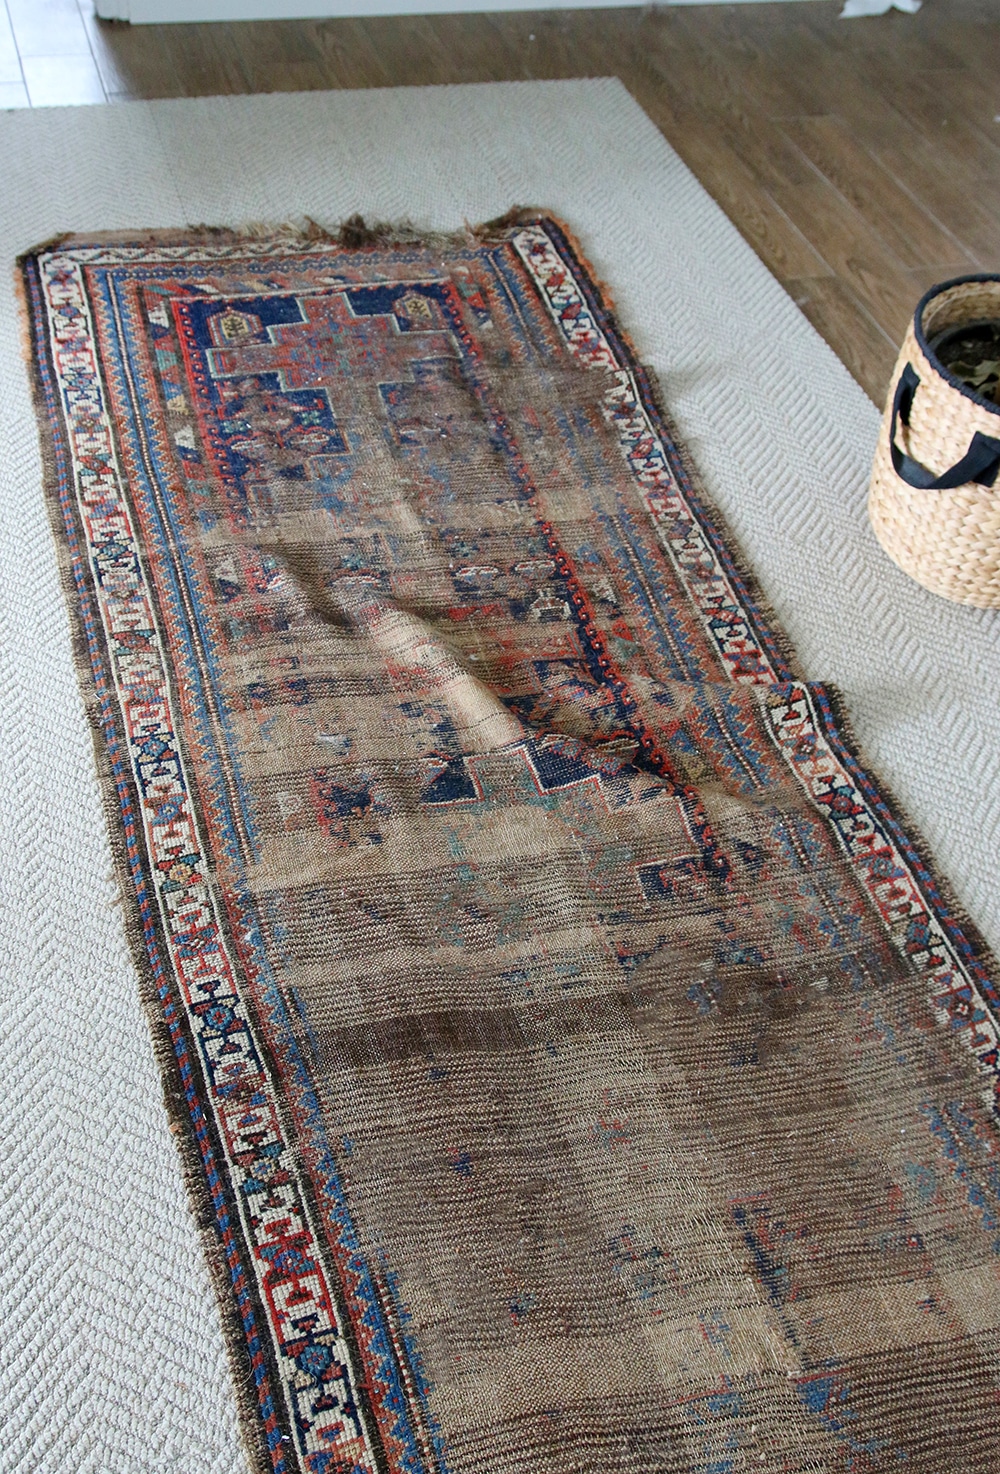 5 Tips For Keeping Area Rugs Exactly, How To Make A Rug Go Flat